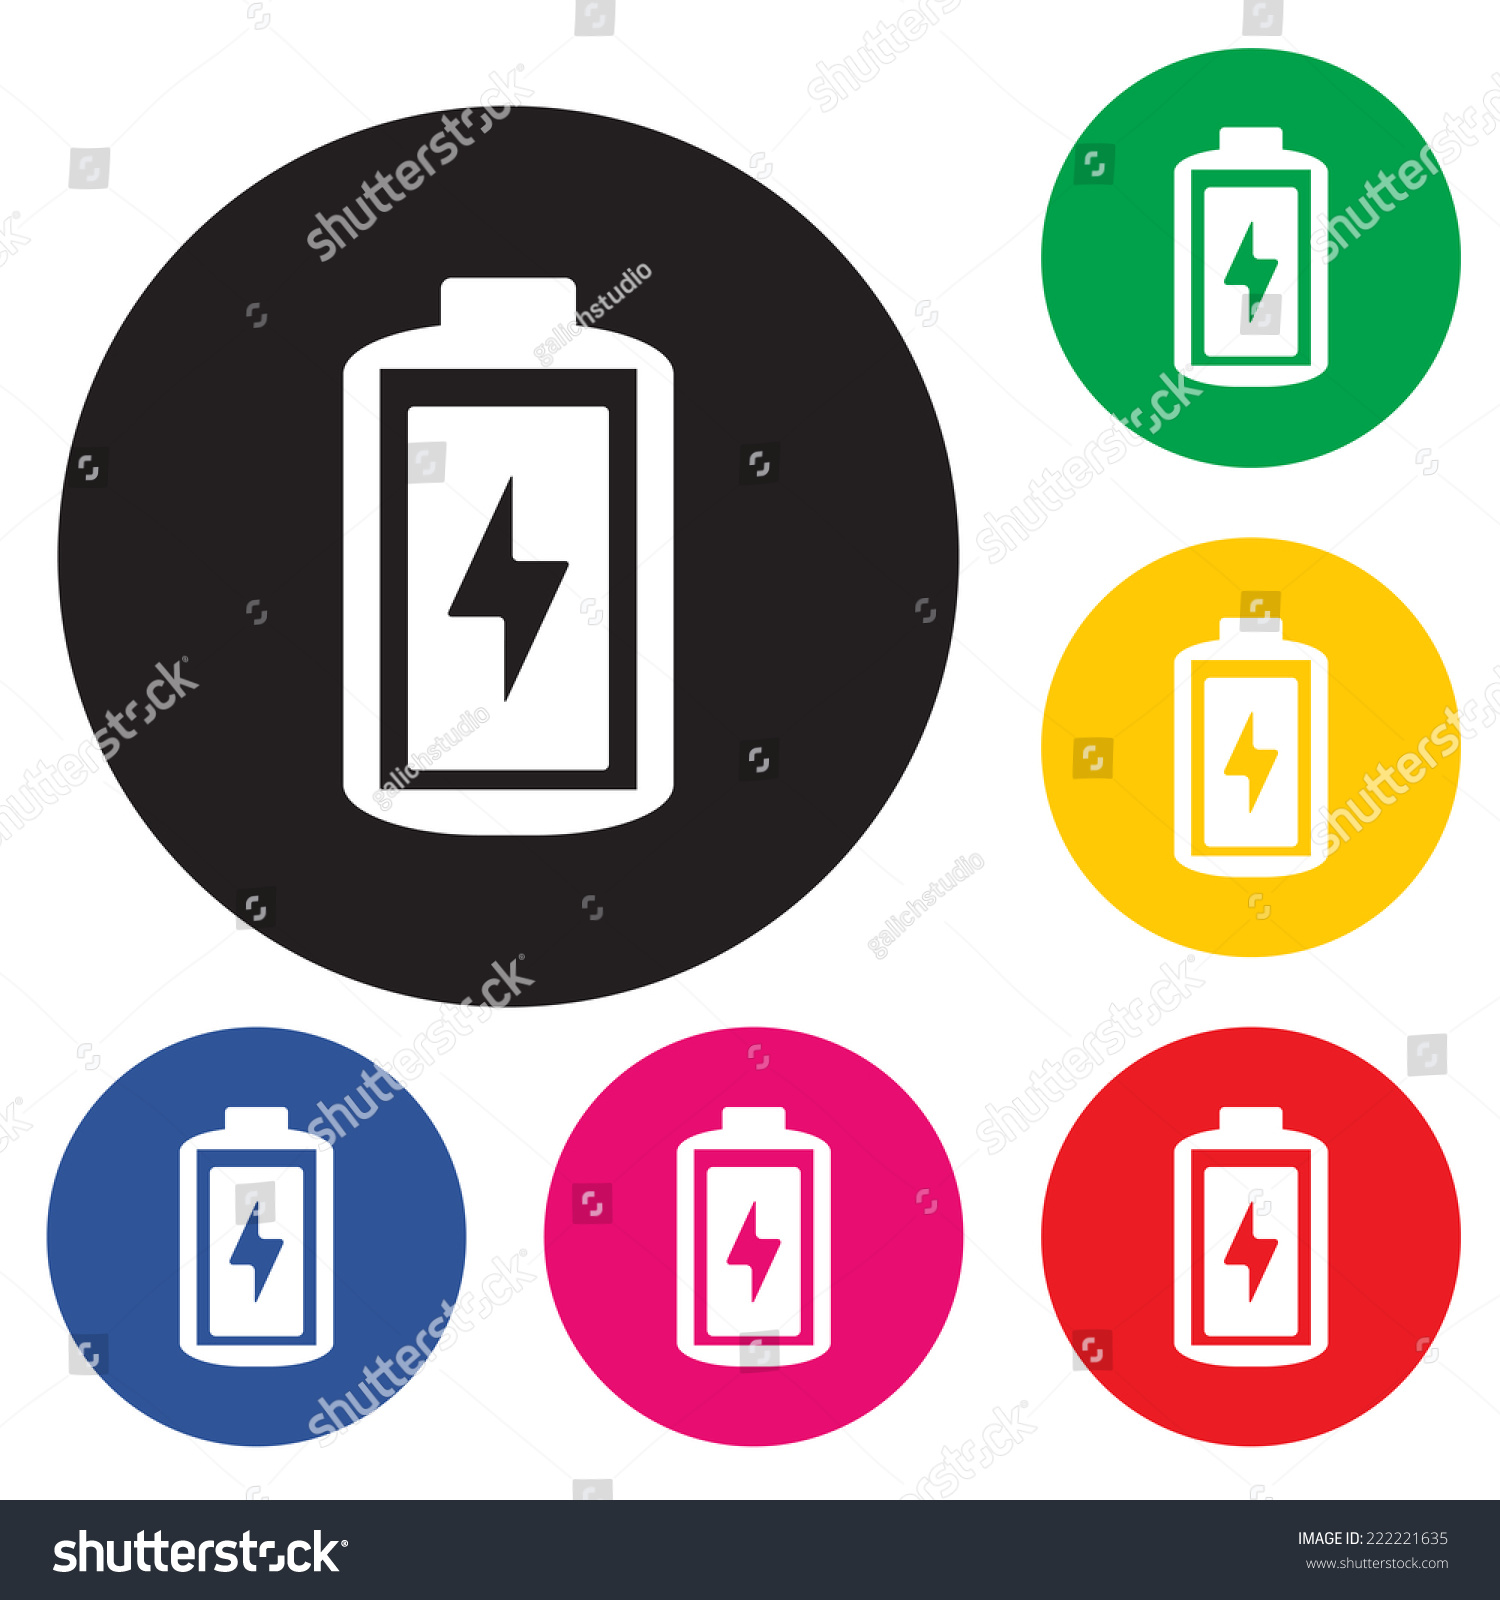 Simple Illustrated Battery Icon With Charge Level. Stock Vector